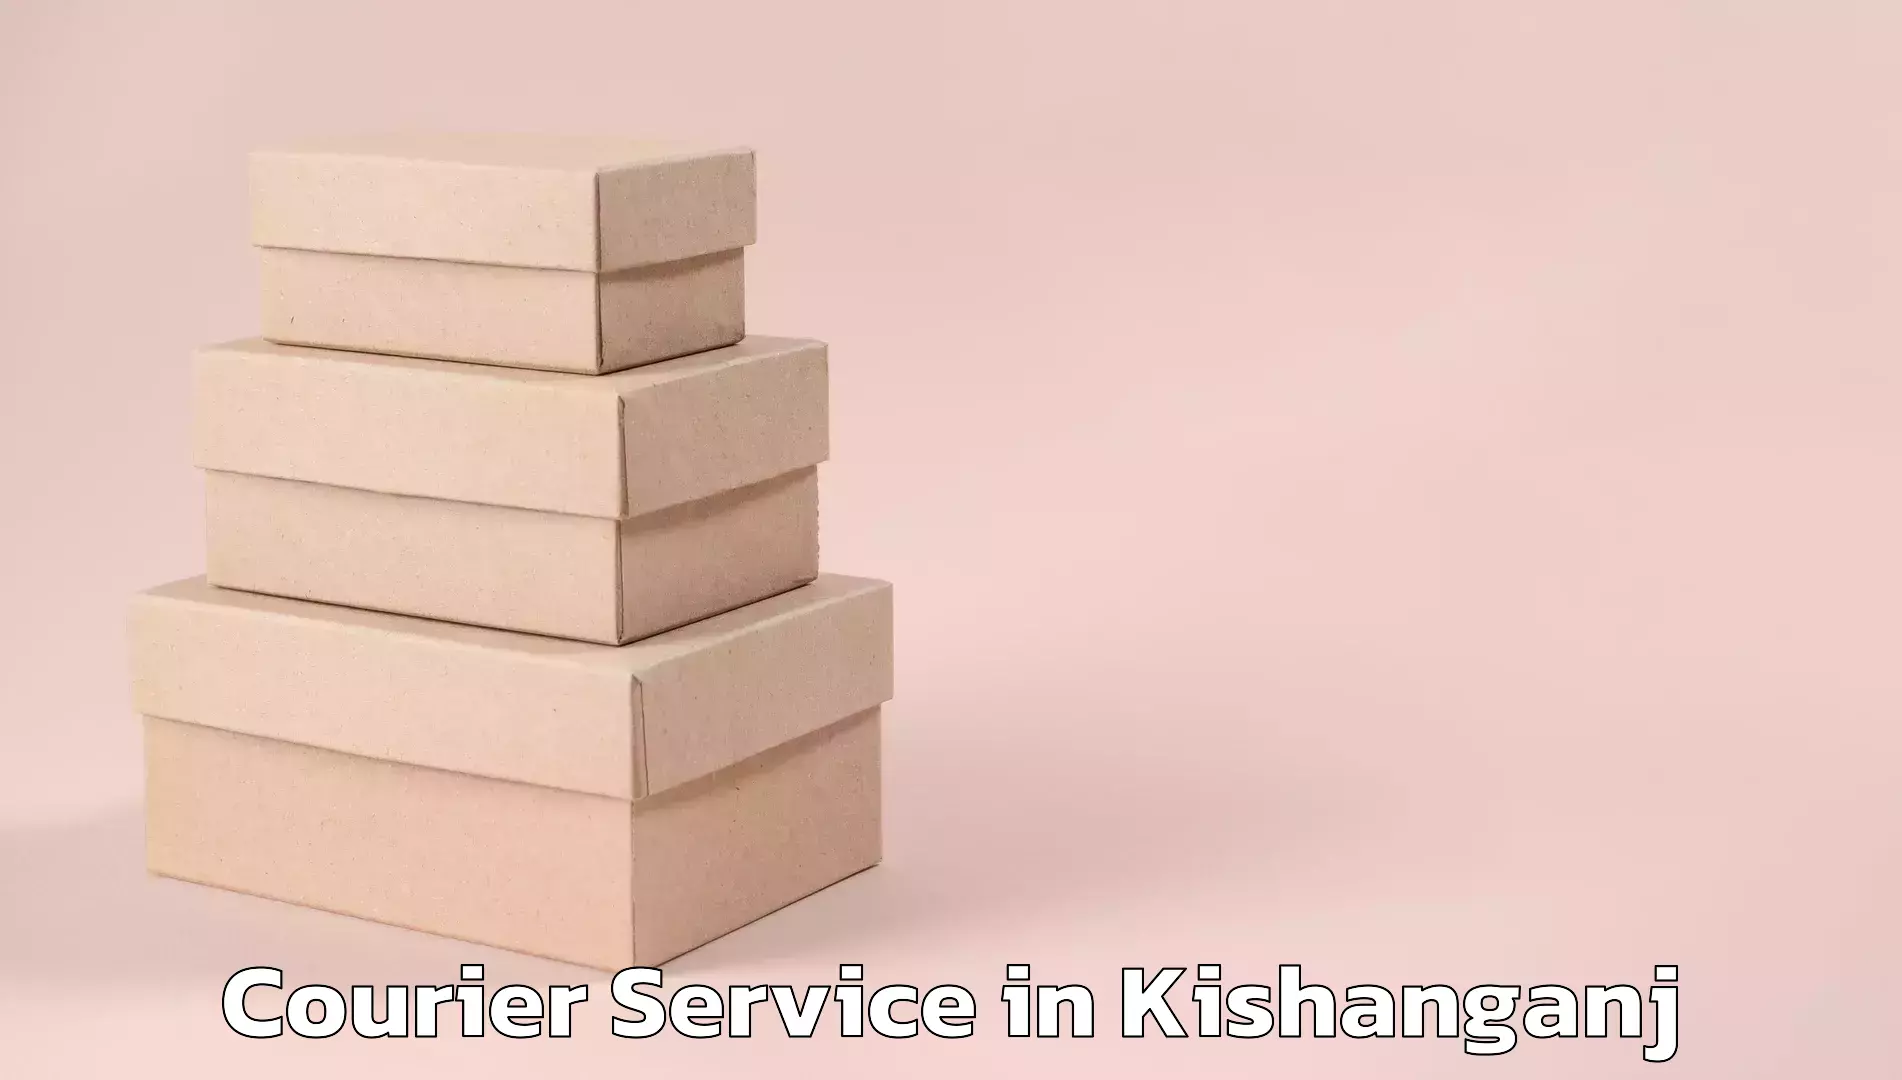 Postal and courier services in Kishanganj